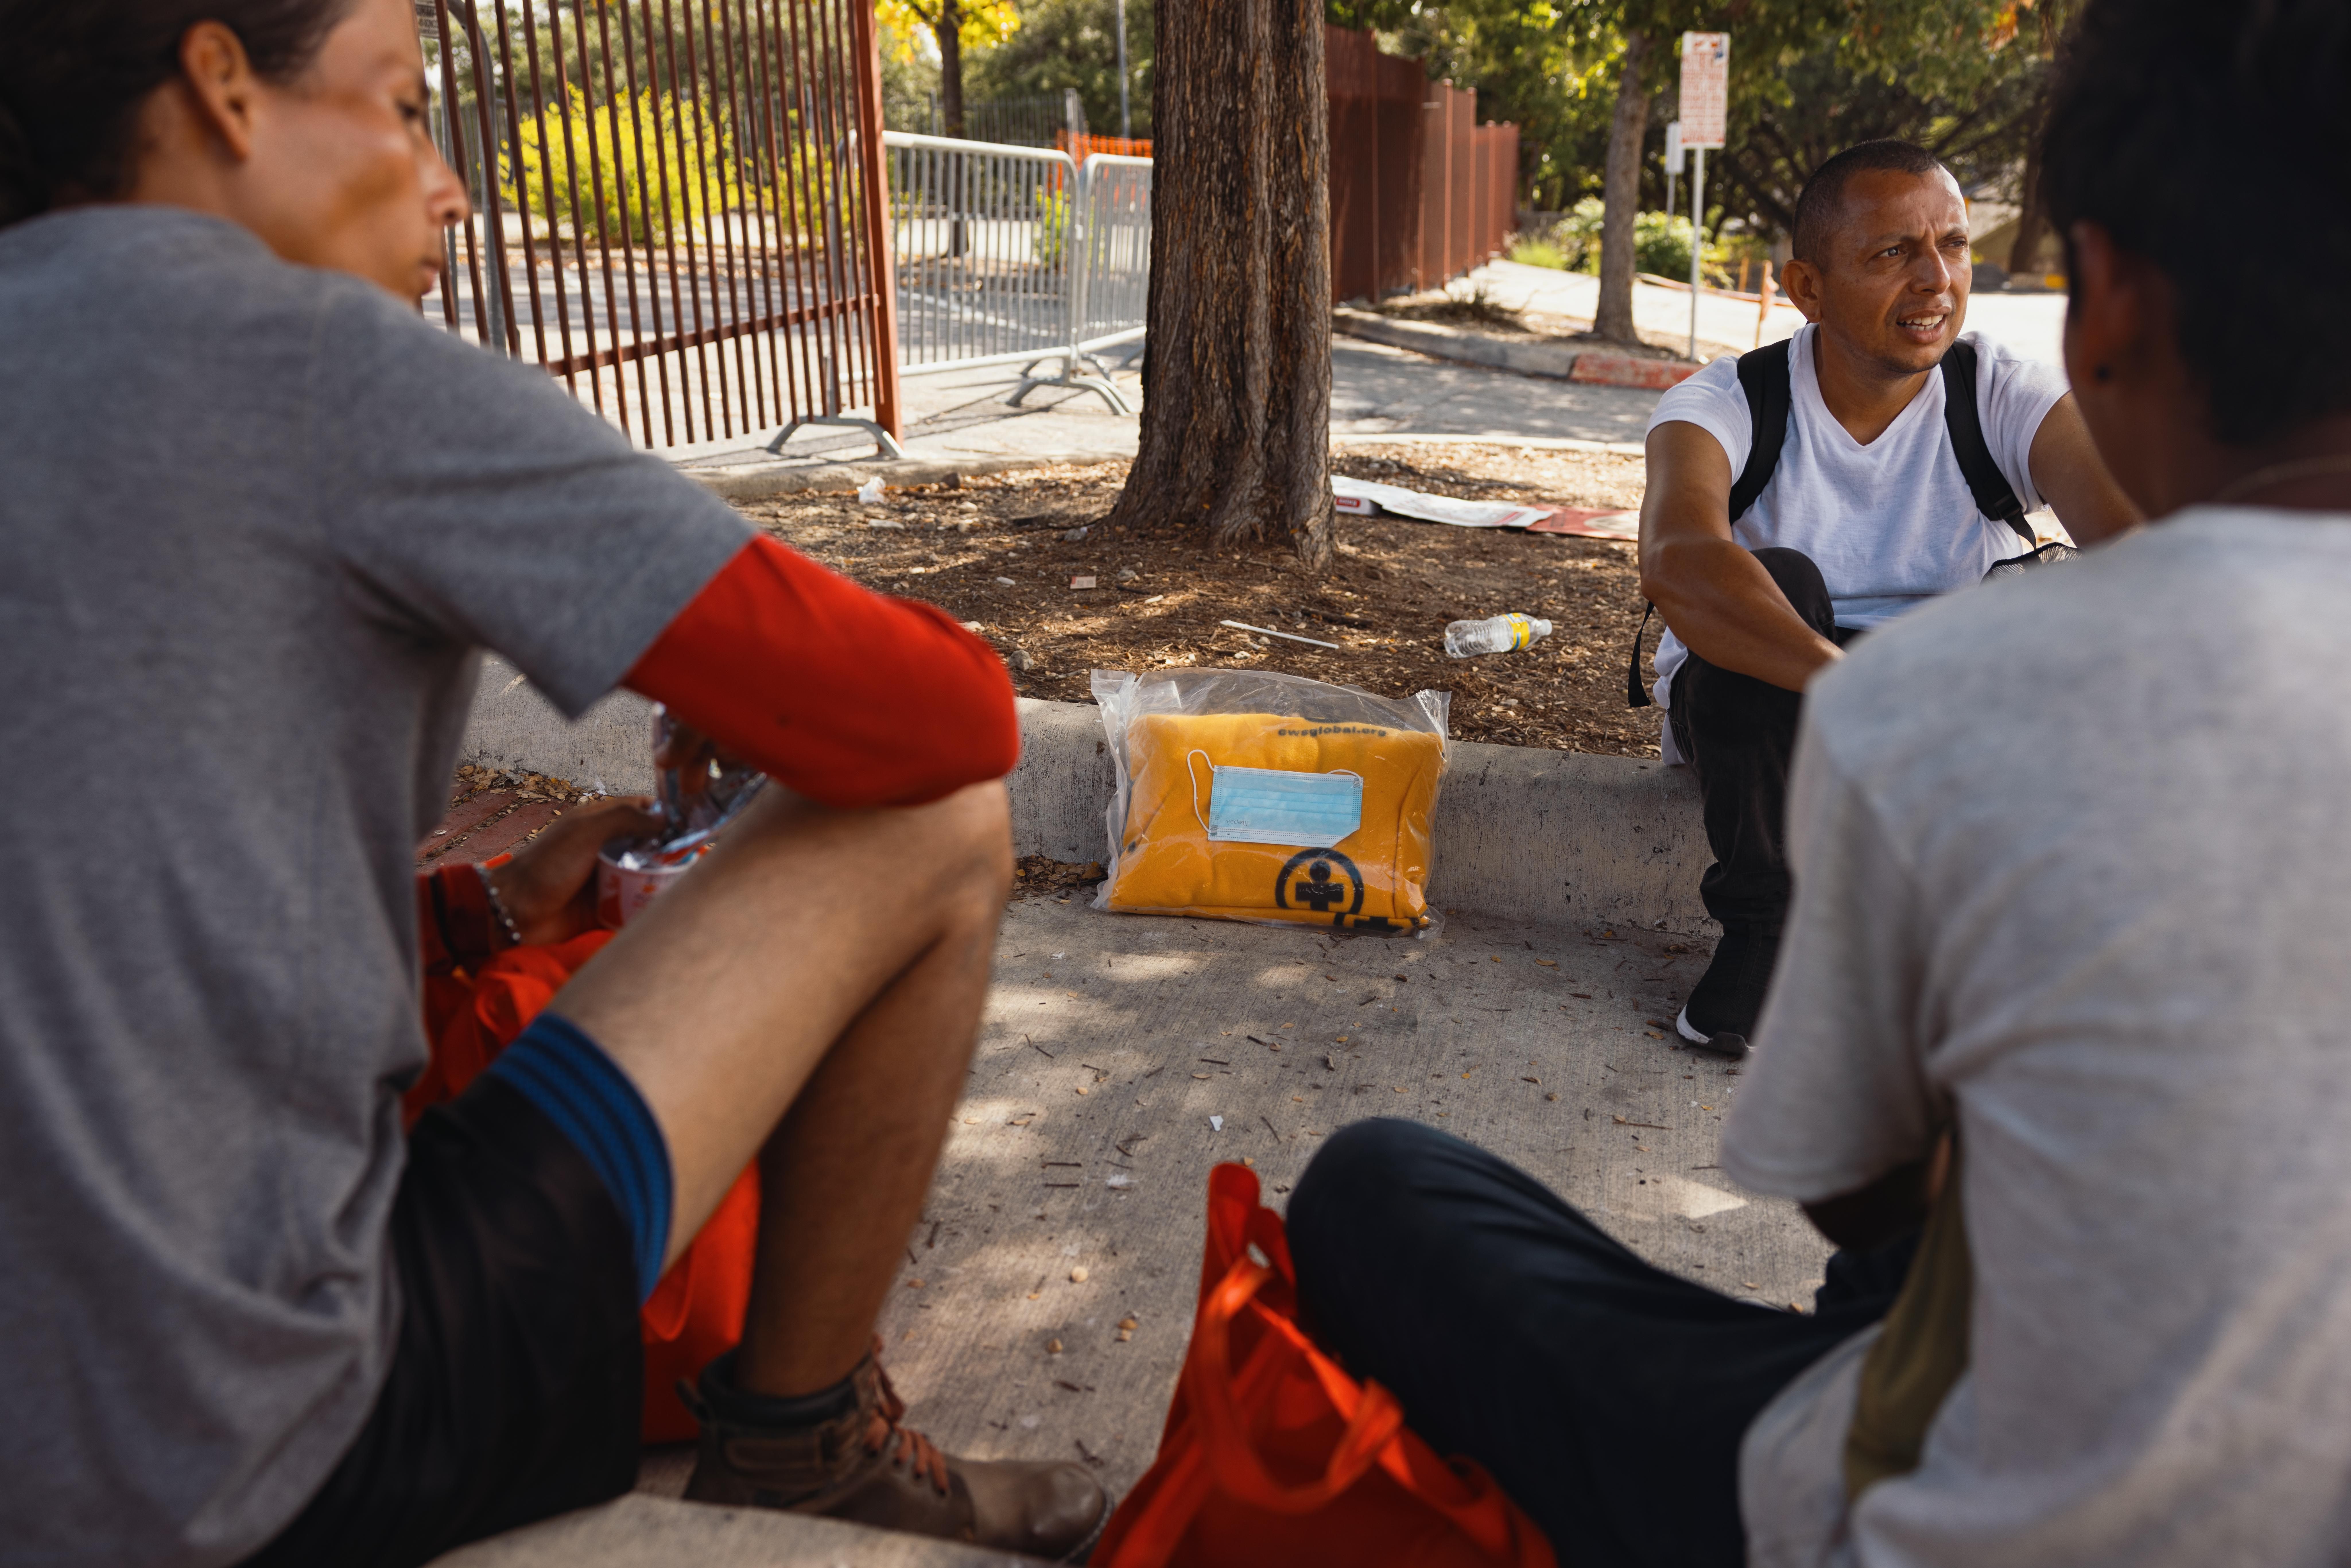 Asylum-seekers sit outside the San Antonio Migrant Resource Center on September 19, 2022. Florida Gov. Ron DeSantis has used the false promise of refugee resettlement benefits to lure immigrants onto flights from the center in Texas to Martha's Vineyard in Massachusetts.